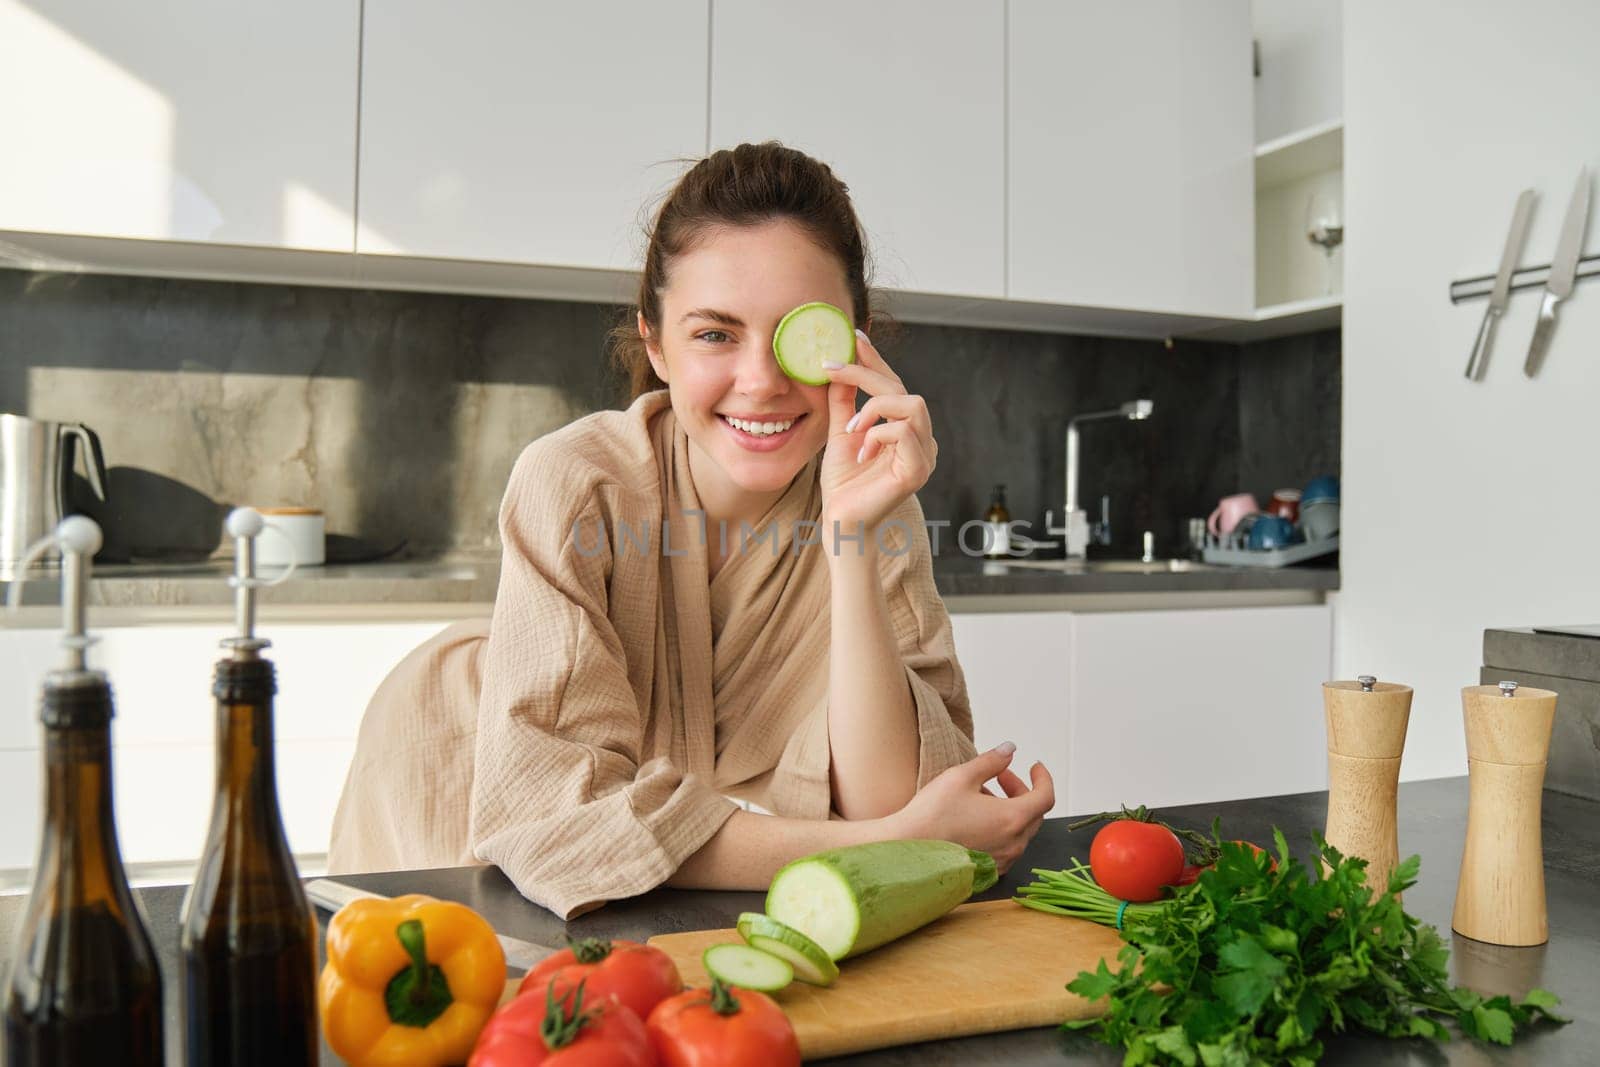 Portrait of smiling brunette woman, girl cooks vegetables, posing with peace of zucchini, leans near chopping board and looking happy while preparing meal, cooking healthy food.